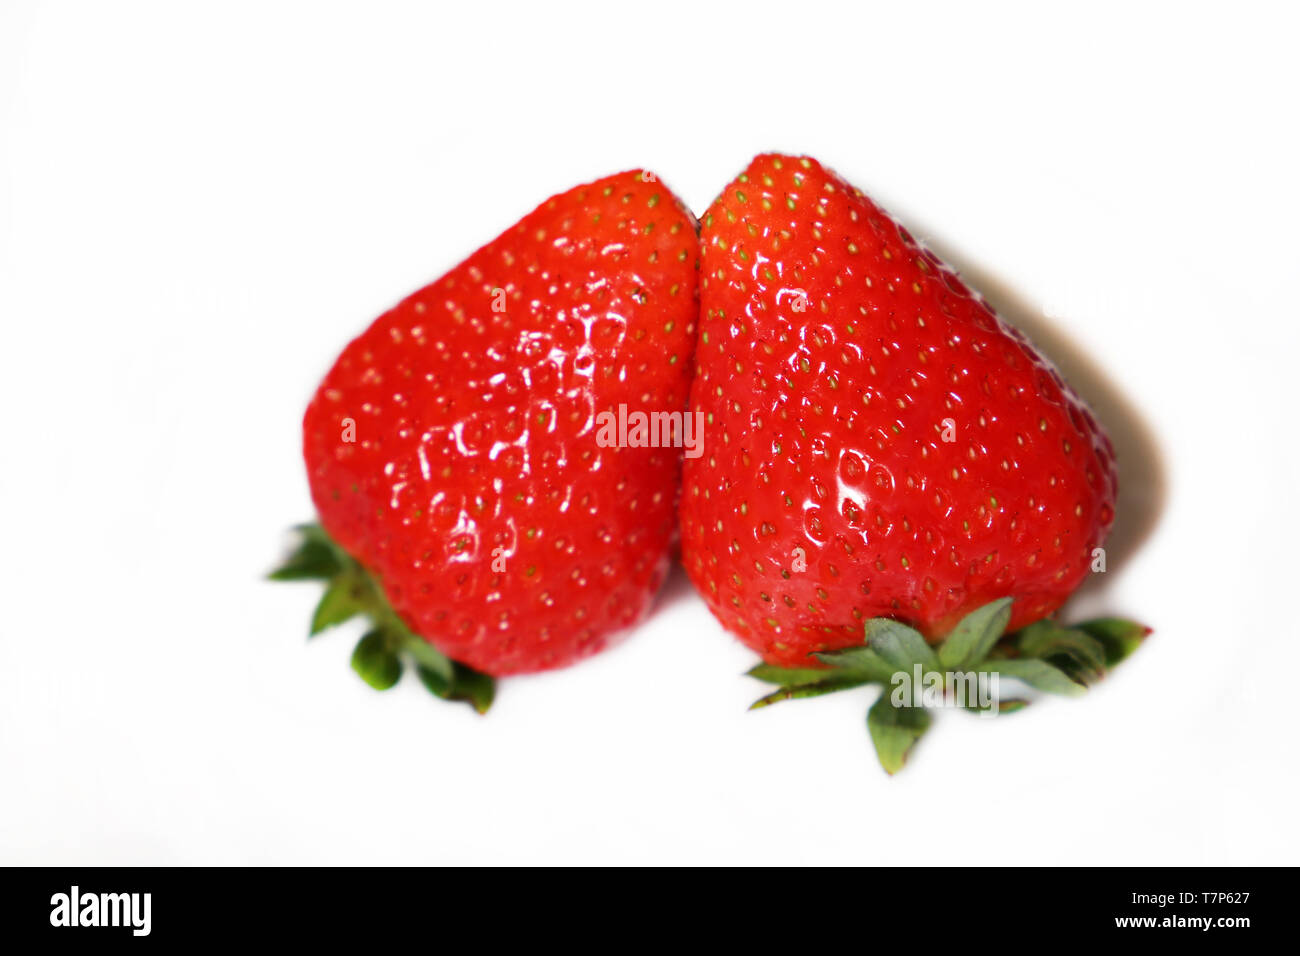 Two strawberries close up isolated on white background. Red ripe strawberry Stock Photo